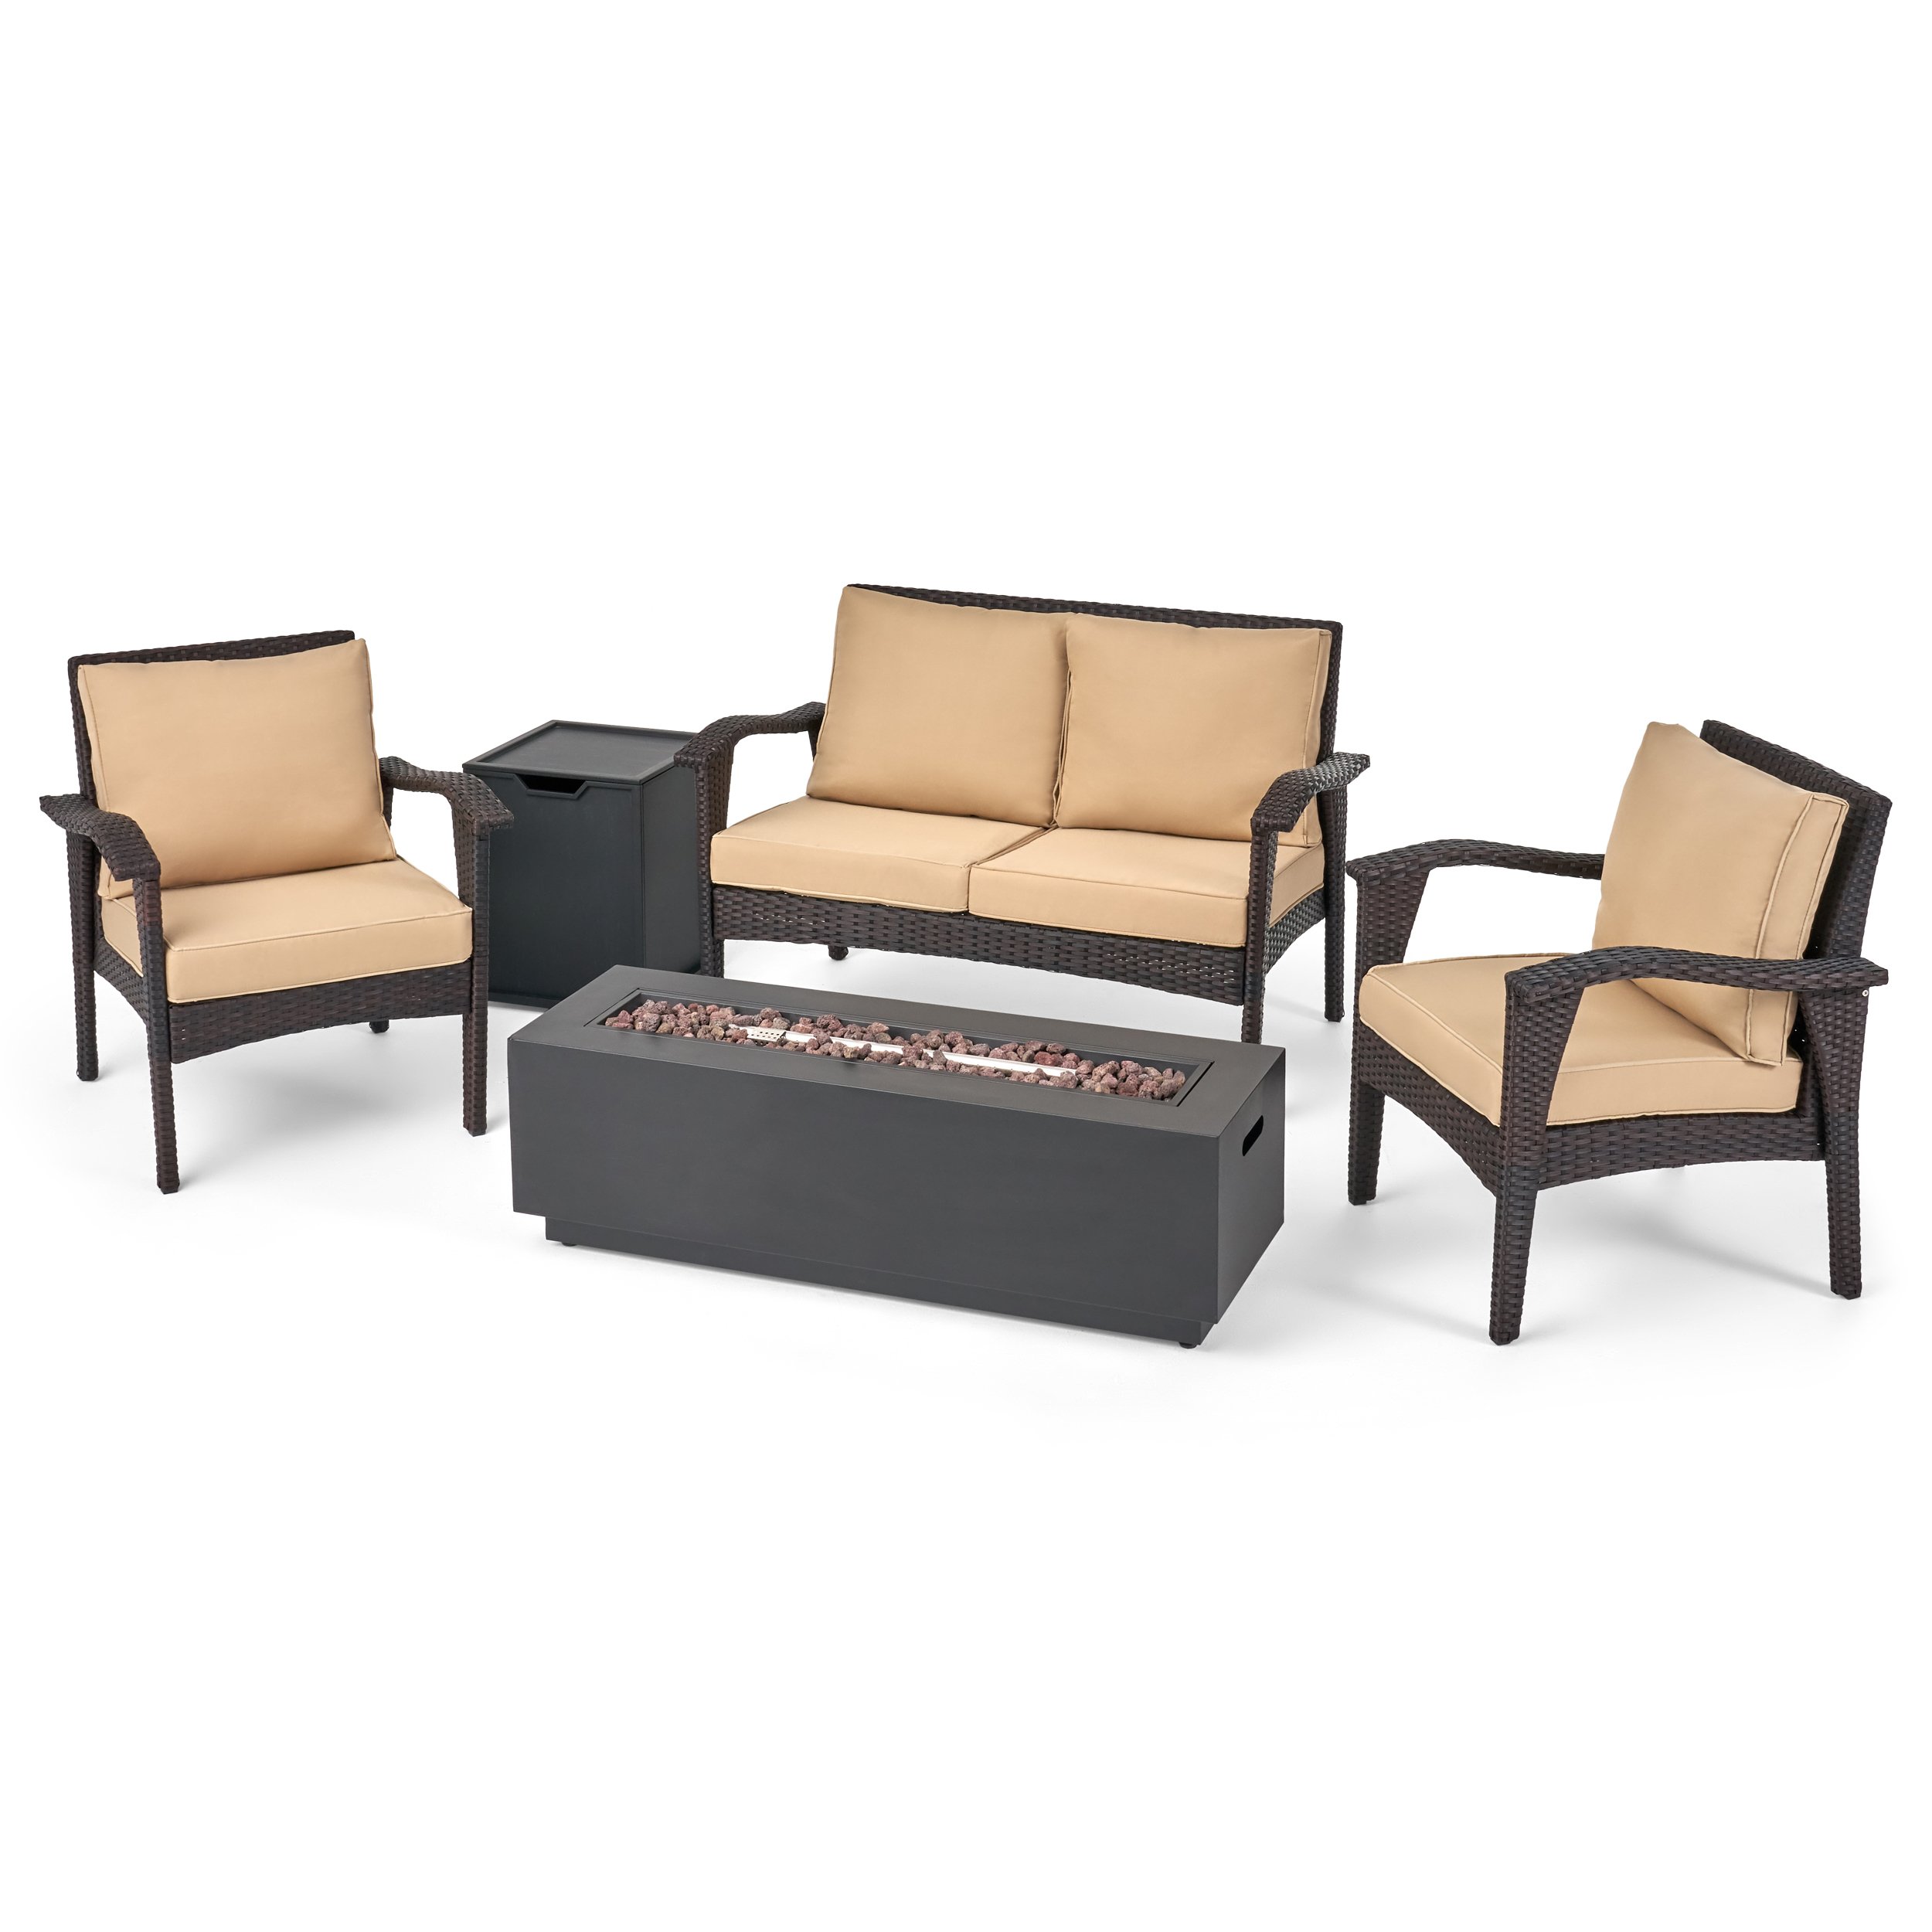 Ophelia Outdoor 4 Seater Wicker Chat Set With Fire Pit - Gray + Light Gray